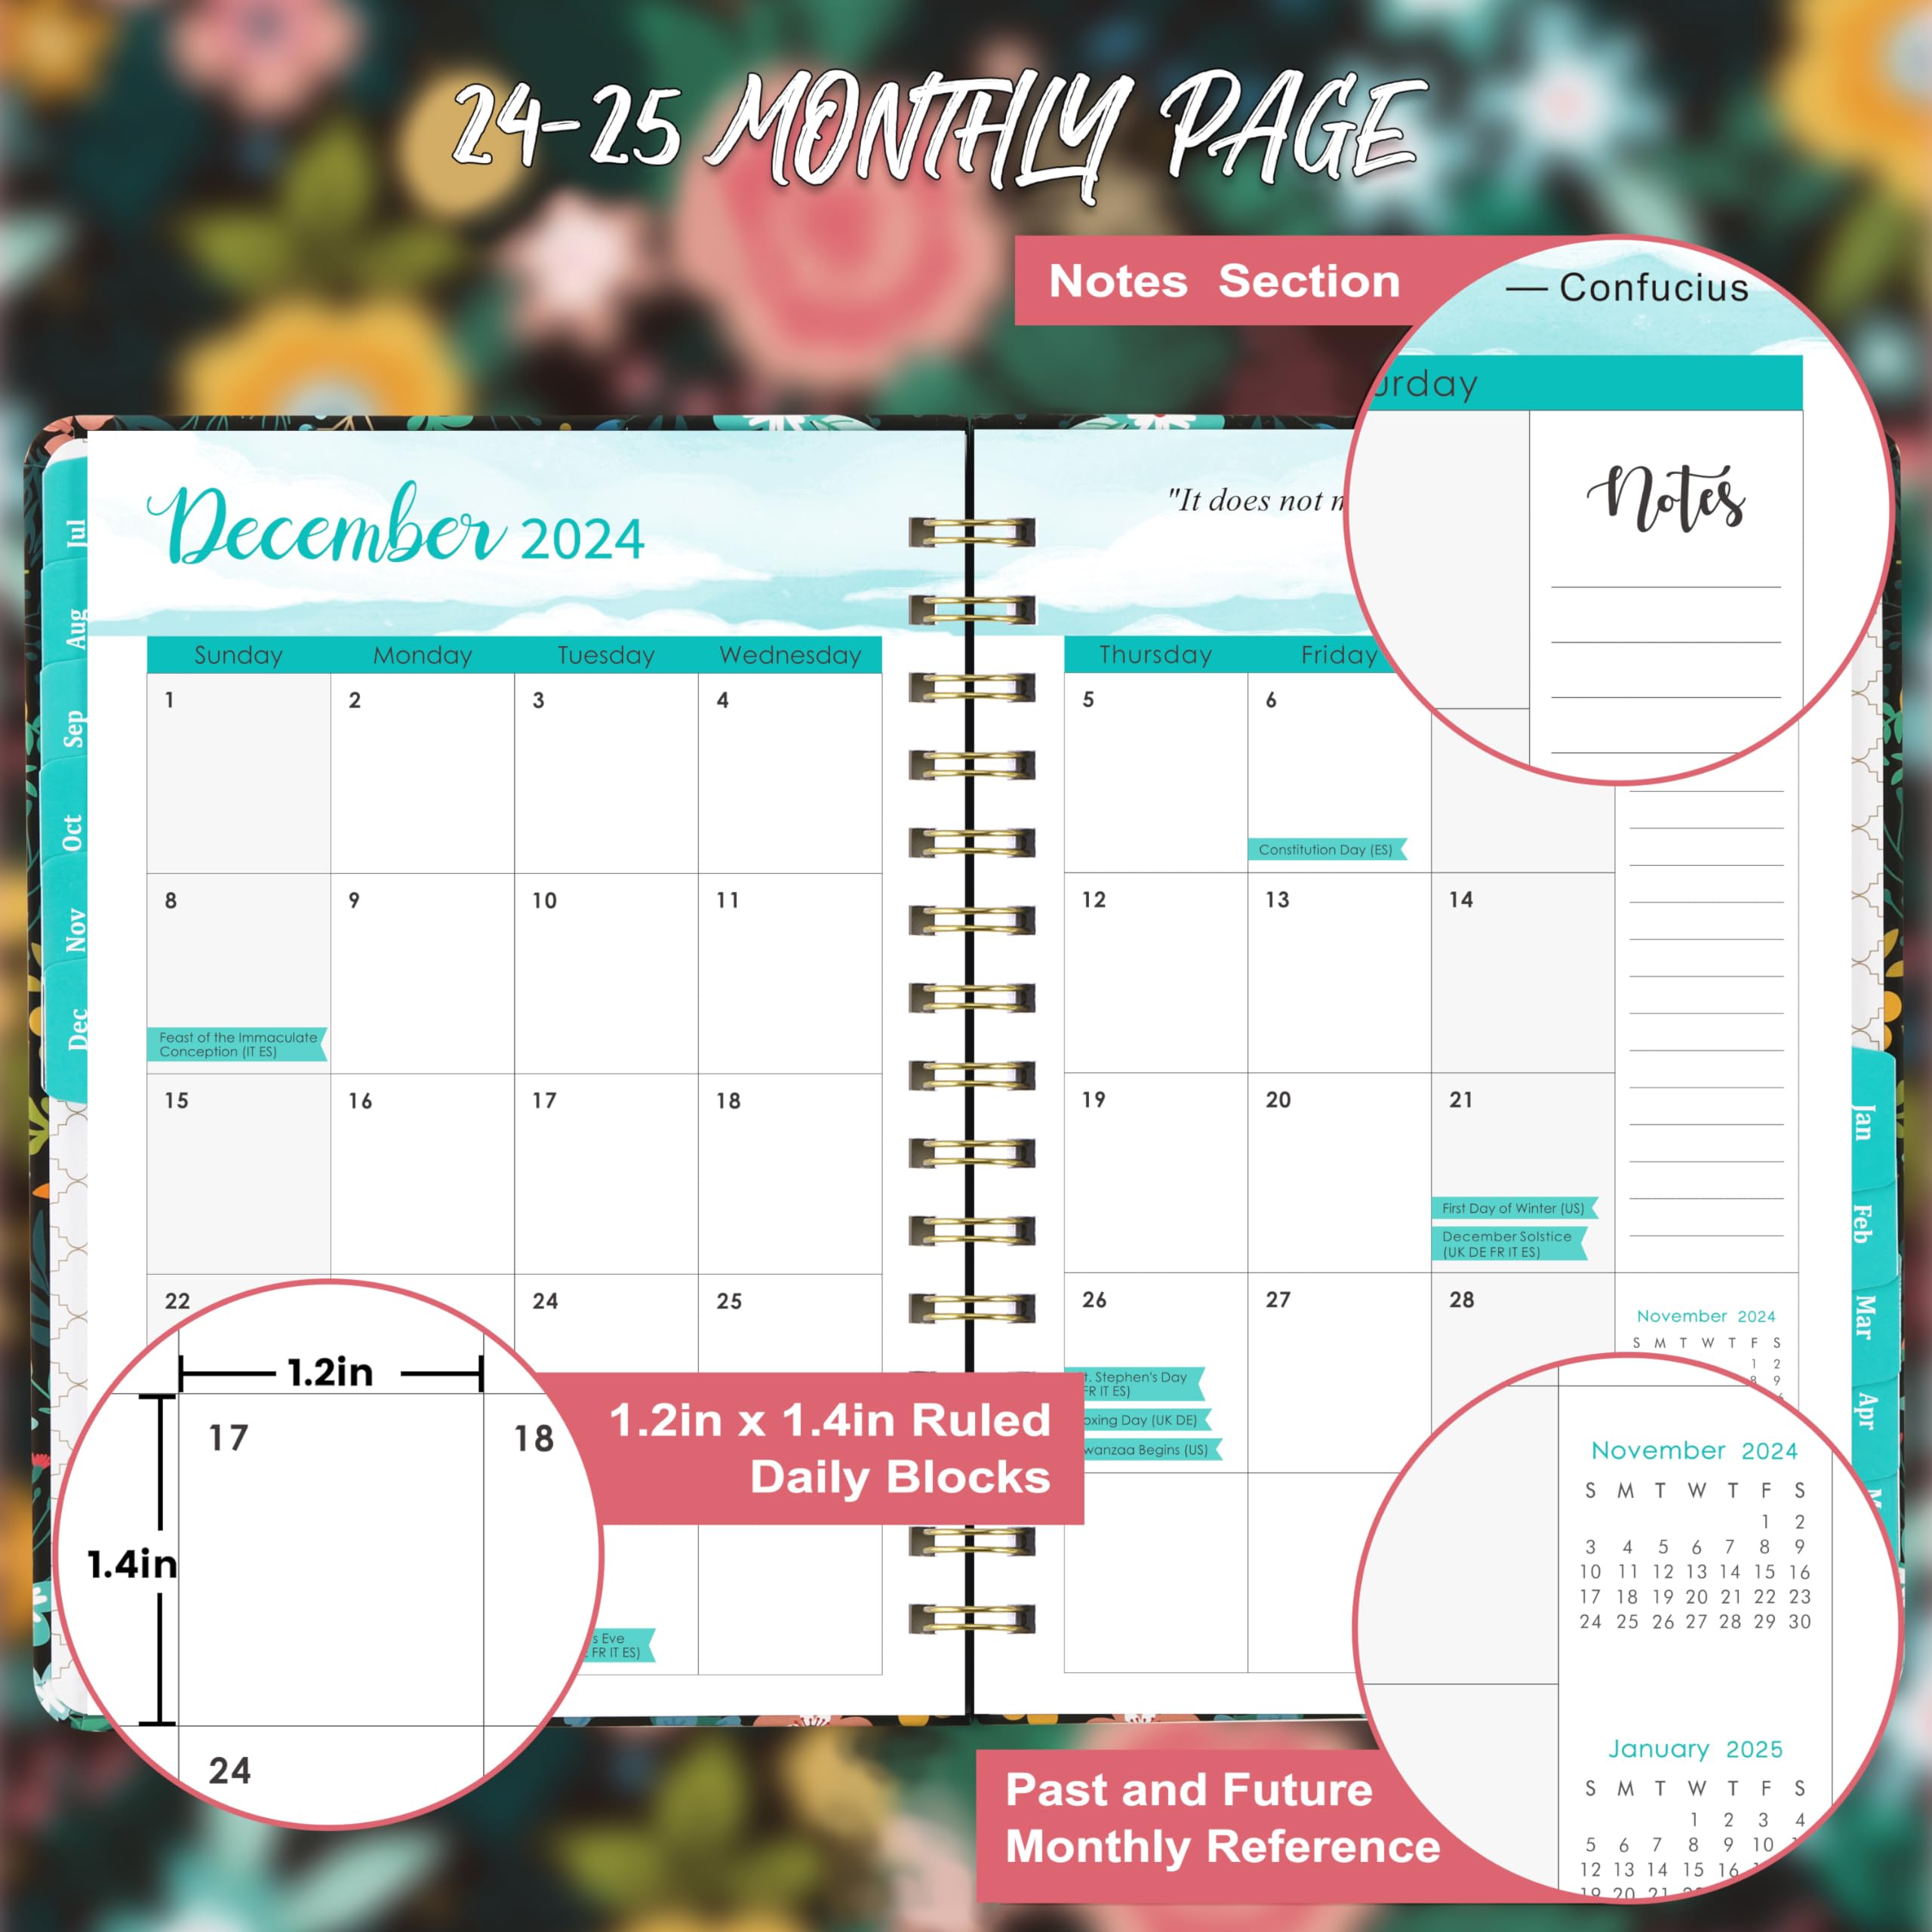 2024-2025 Planner - Planner 2024-2025, July 2024 - June 2025, Weekly & Monthly Planner with Tabs, 6.37" x 8.46", Hardcover + Inner Pocket + Thick Paper - Colorful Flower